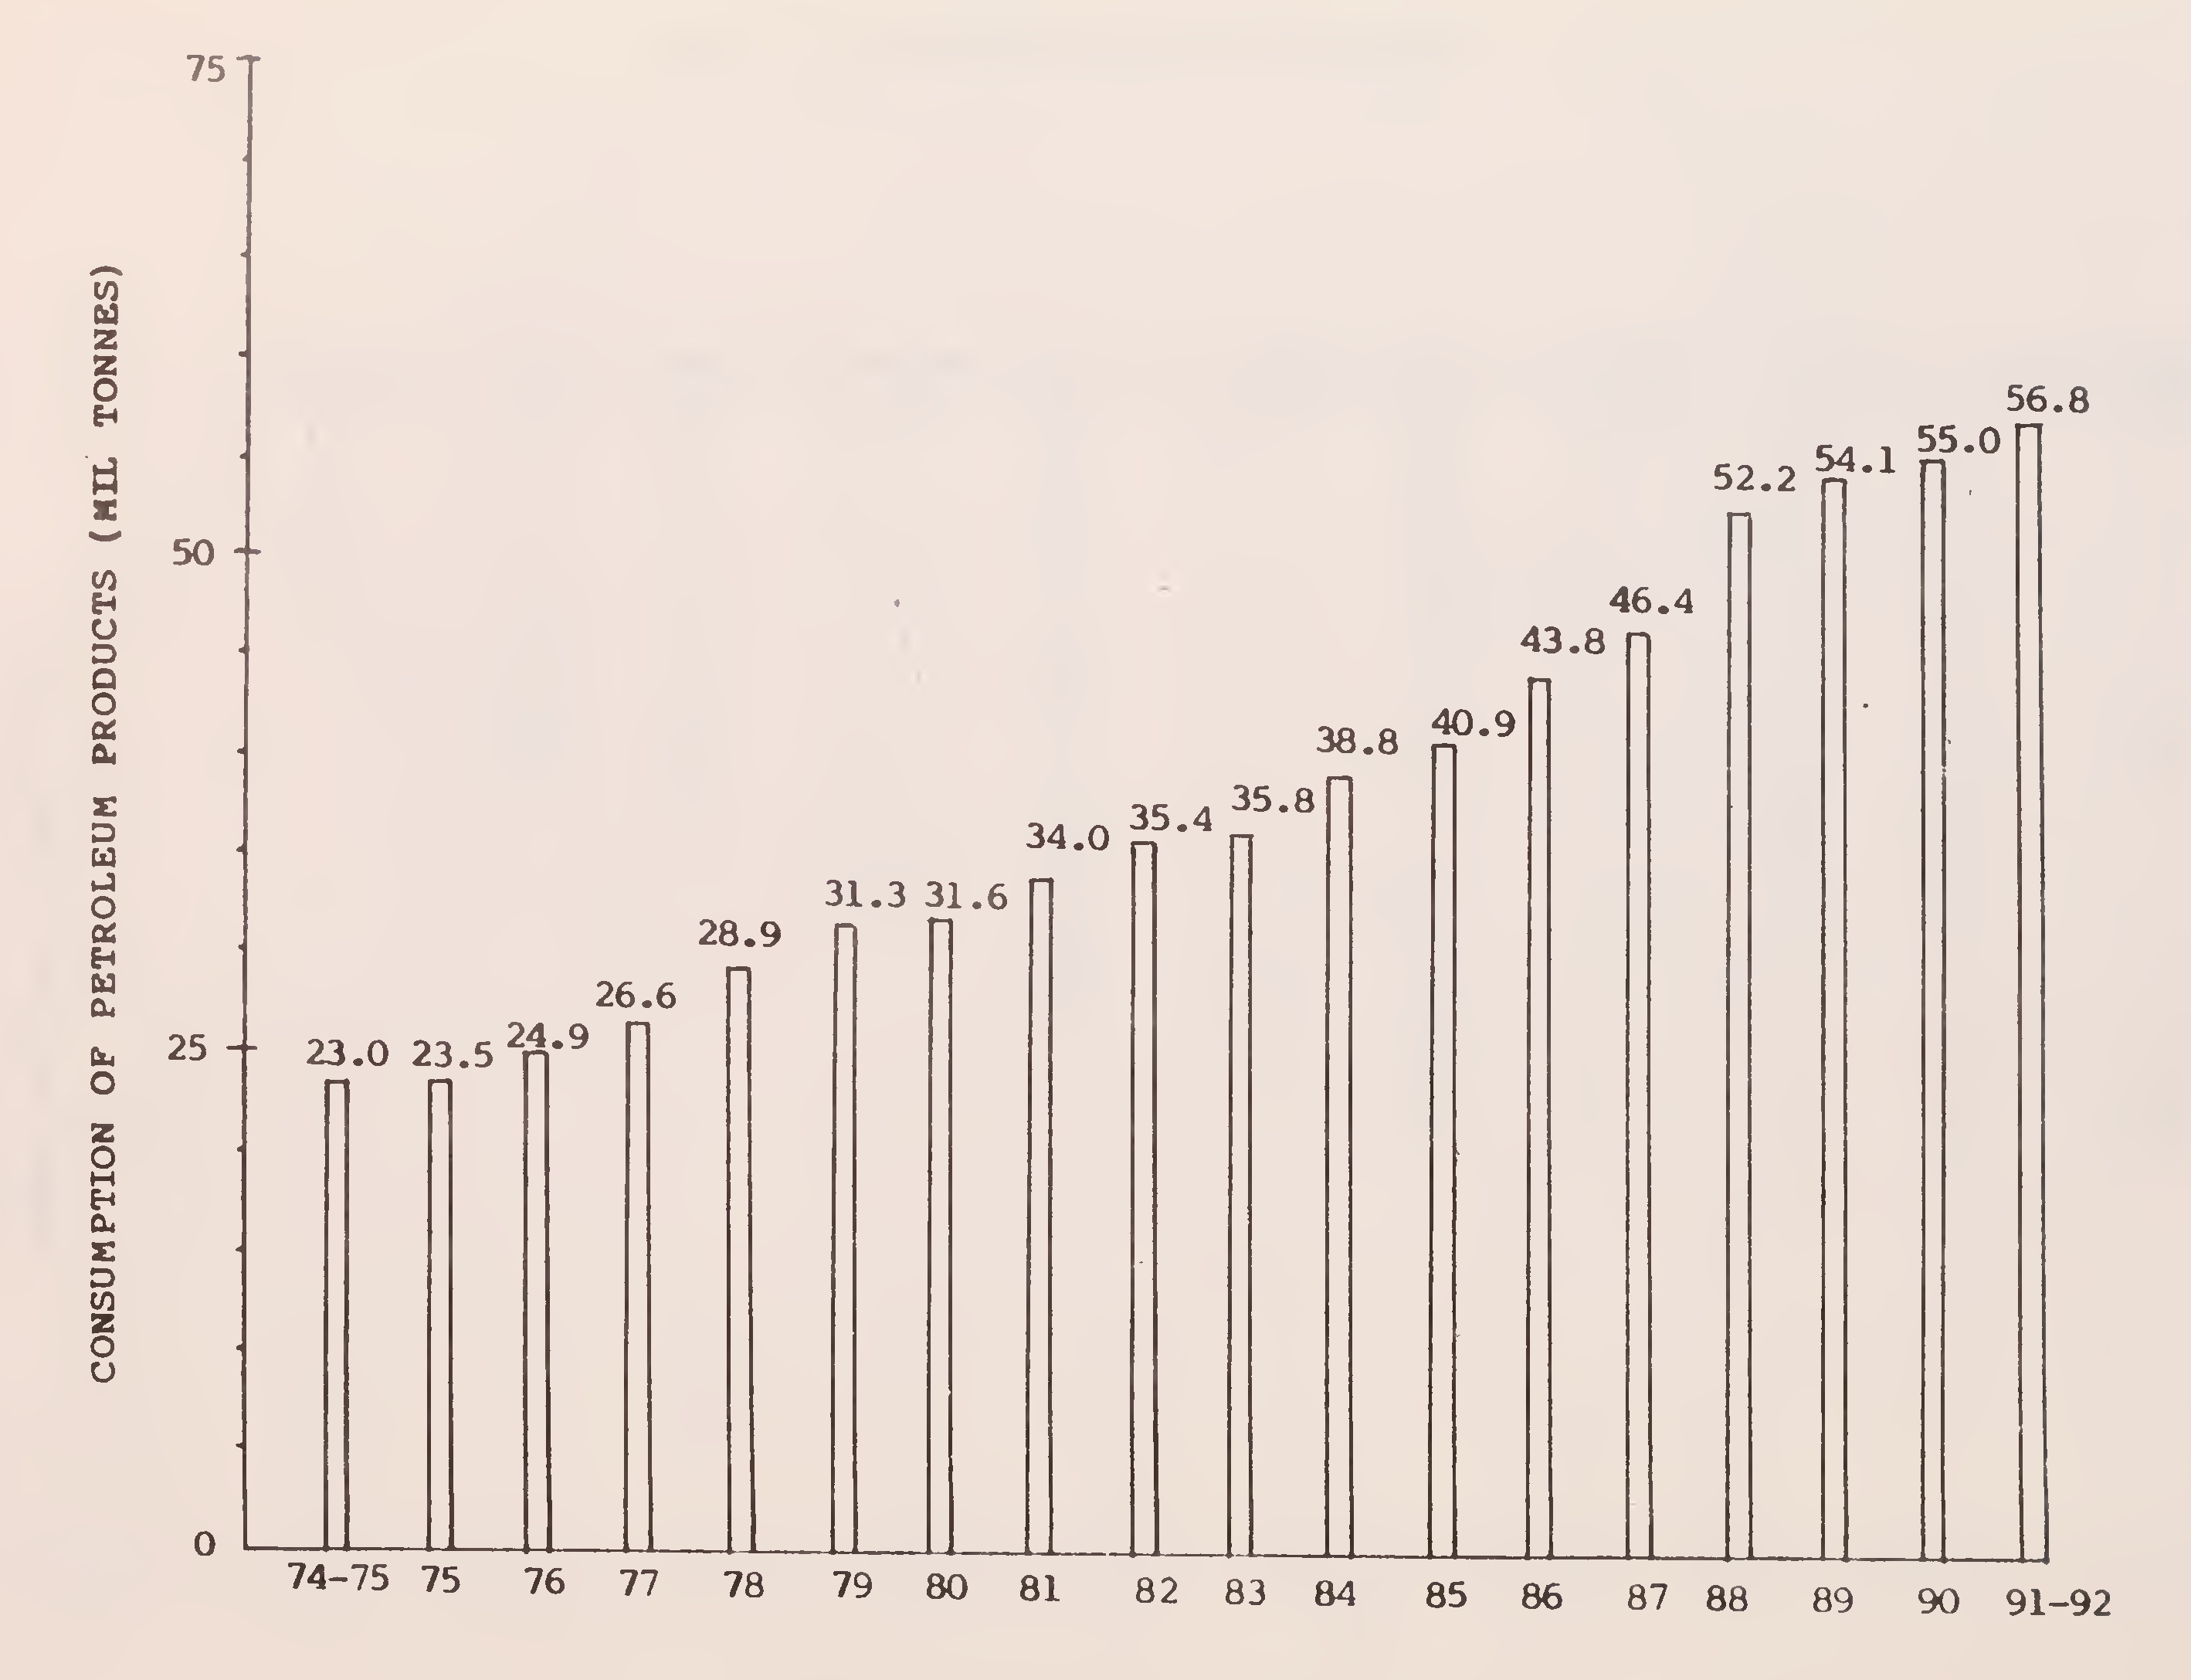 Fig. 6. Consumption of petroleum products